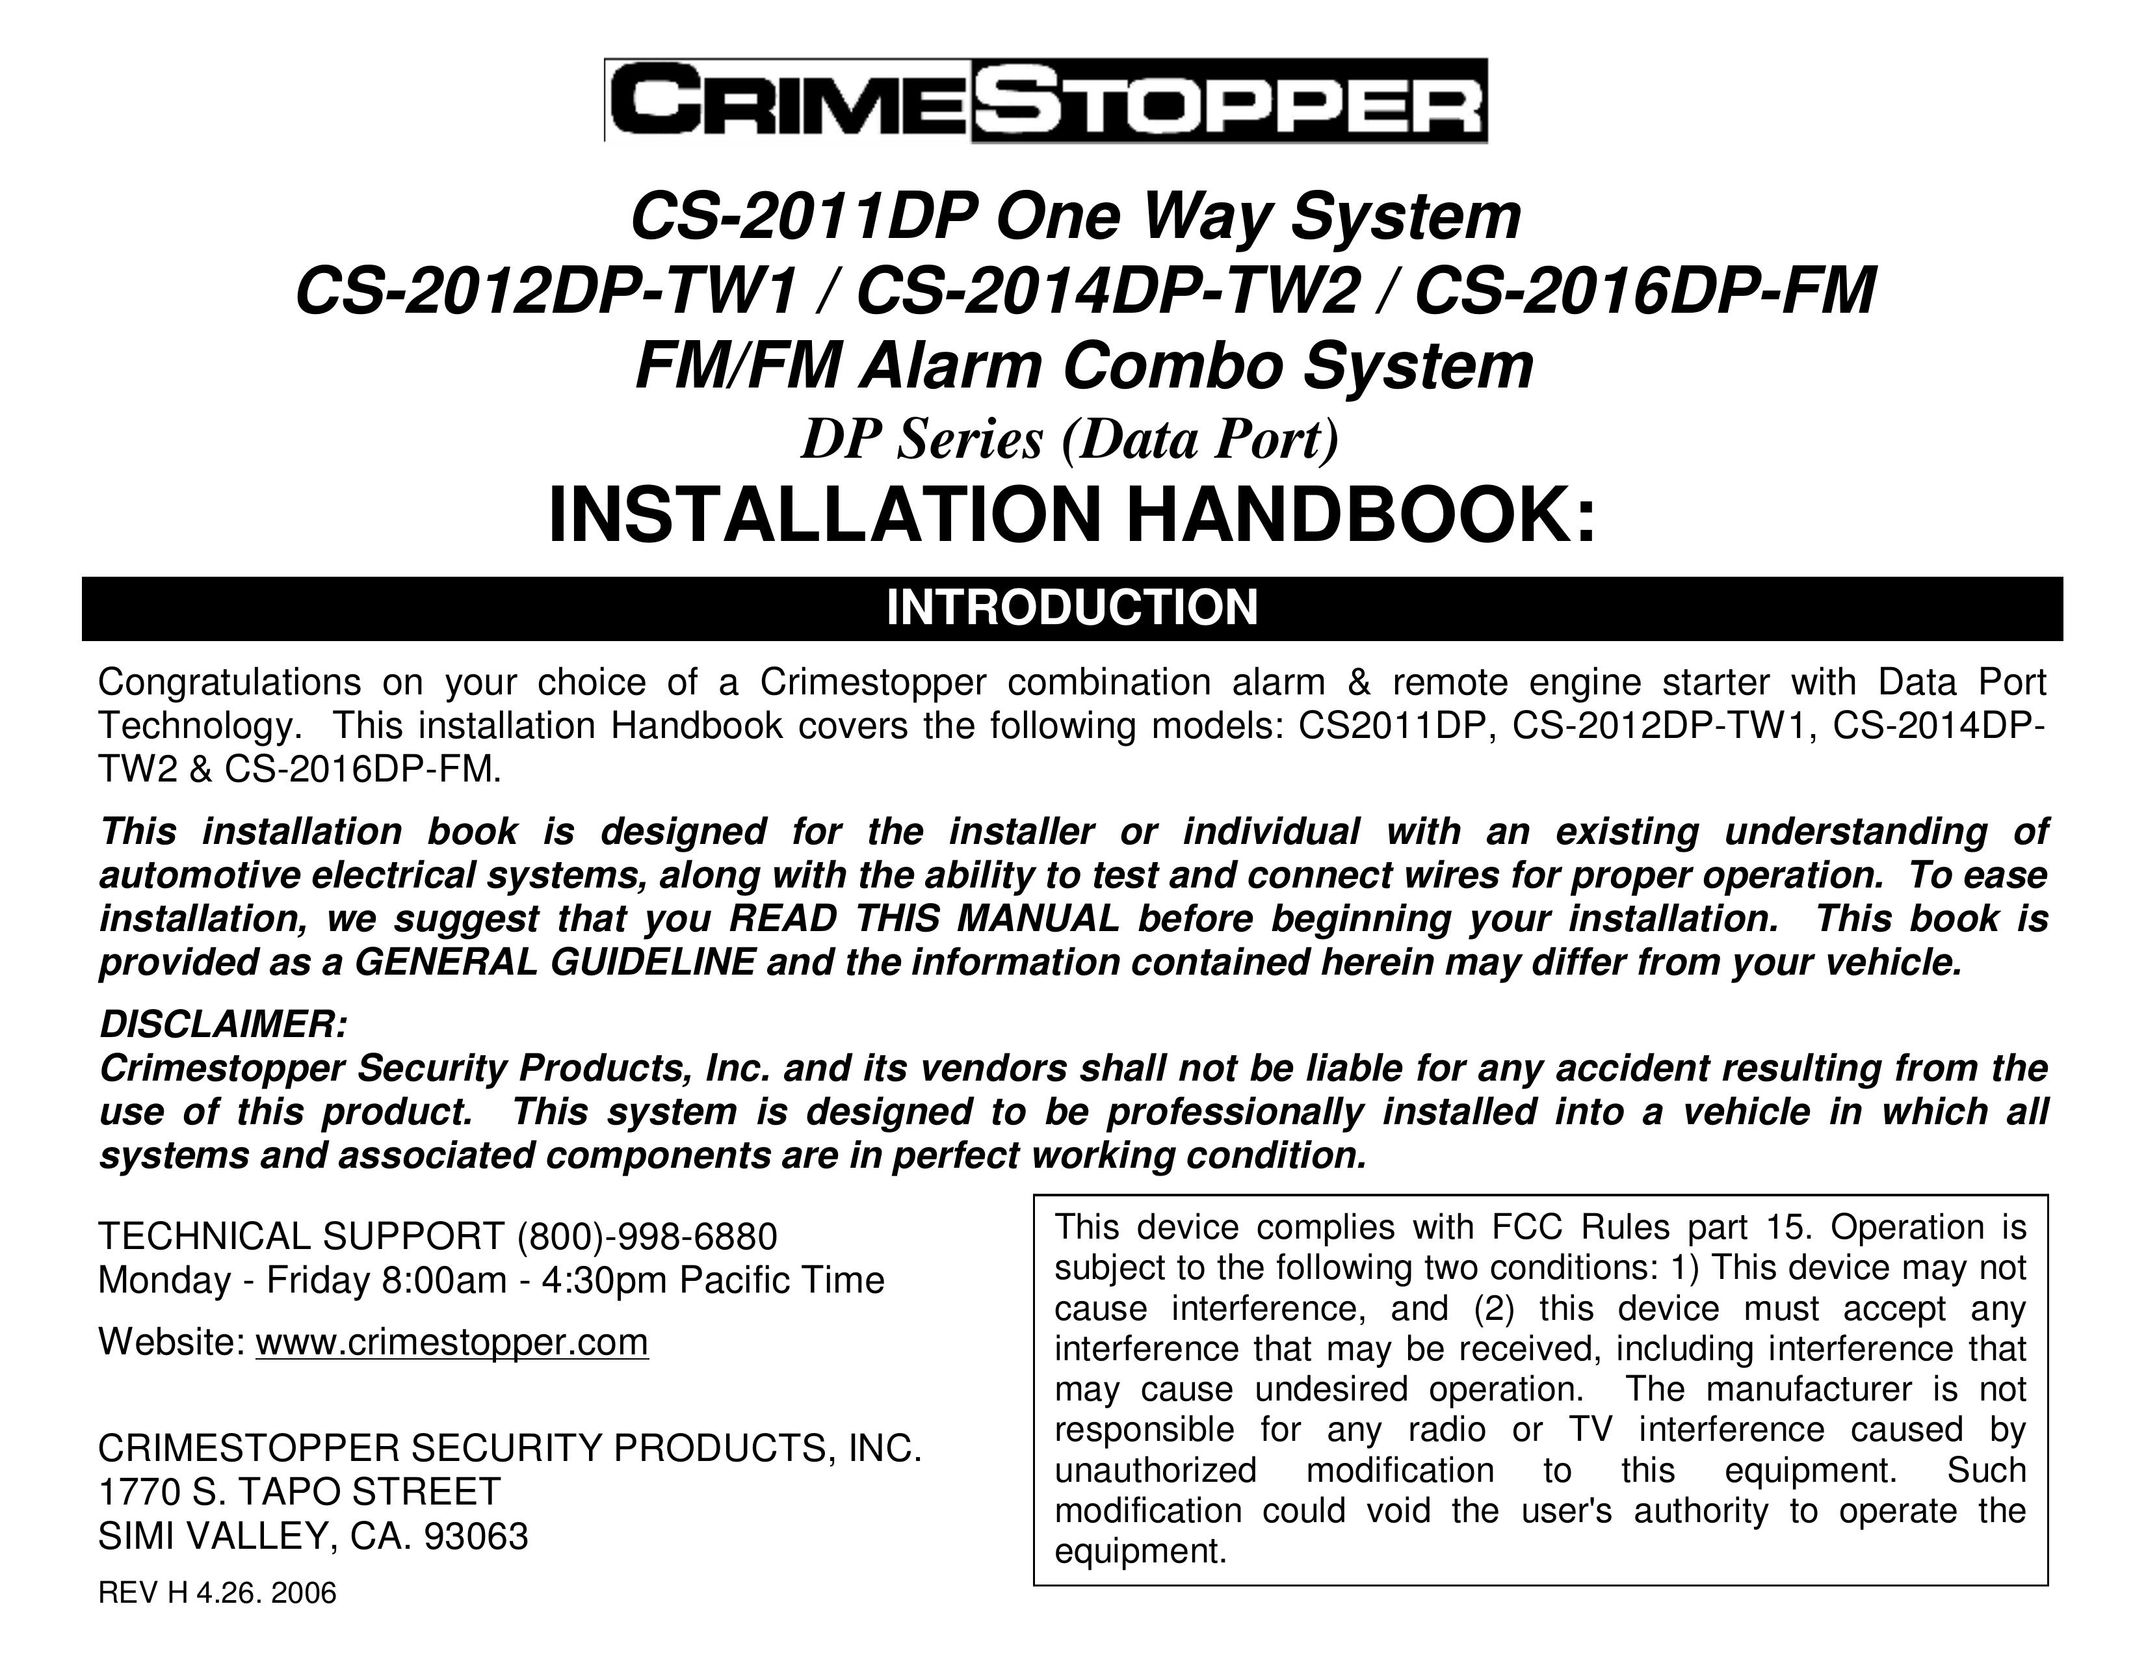 Crimestopper Security Products CS-2012DP-TW1 Car Video System User Manual